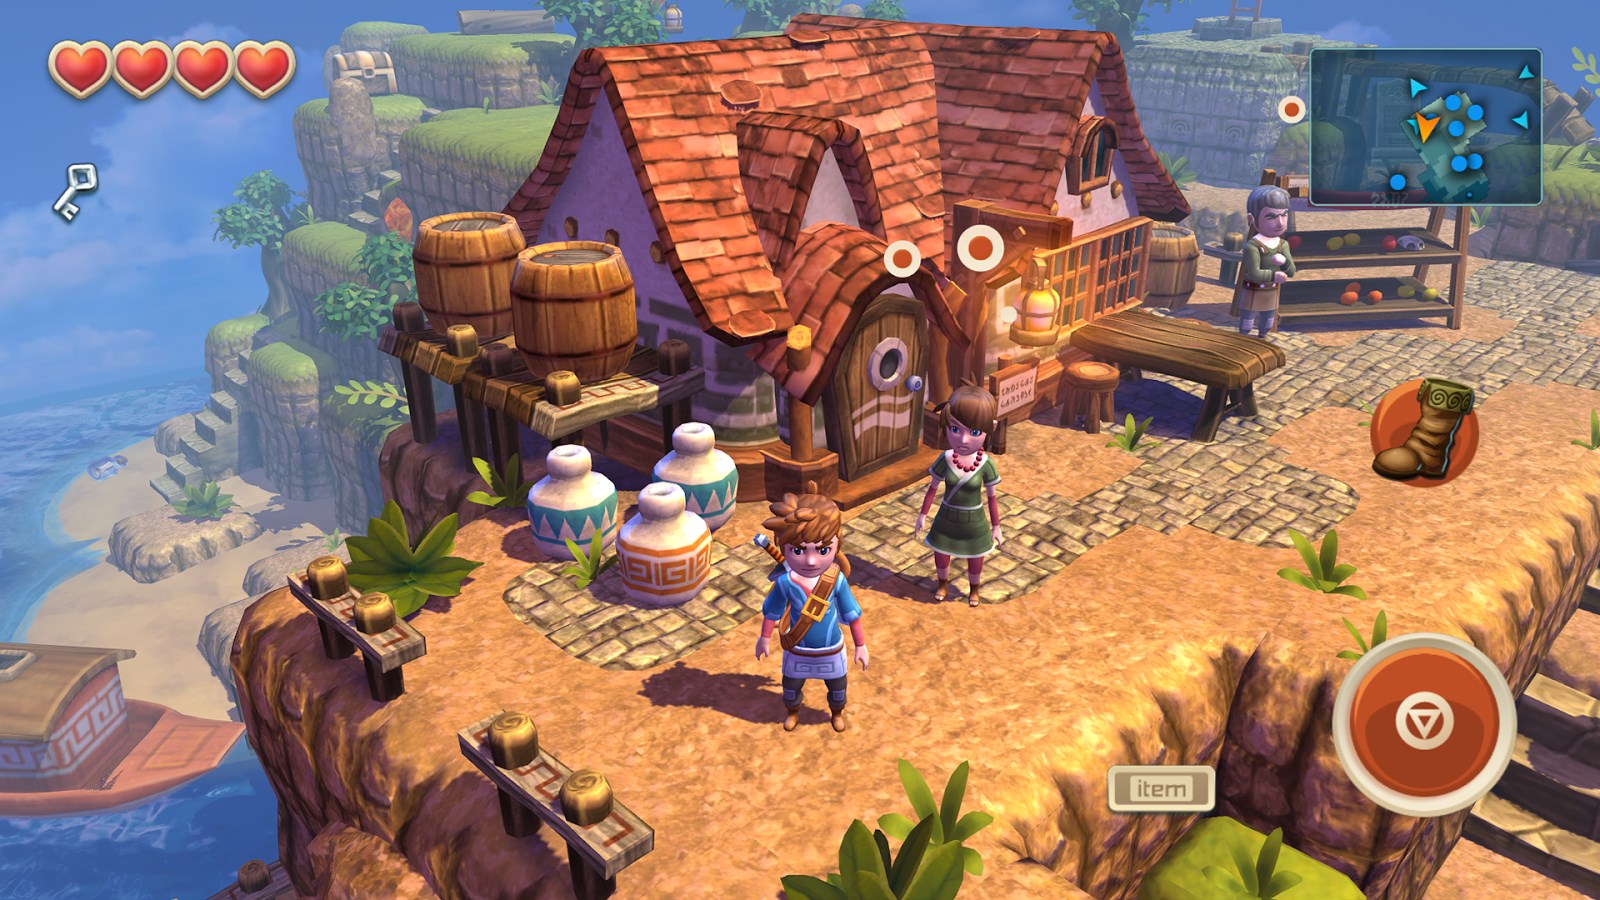 oceanhorn 2 game download for android